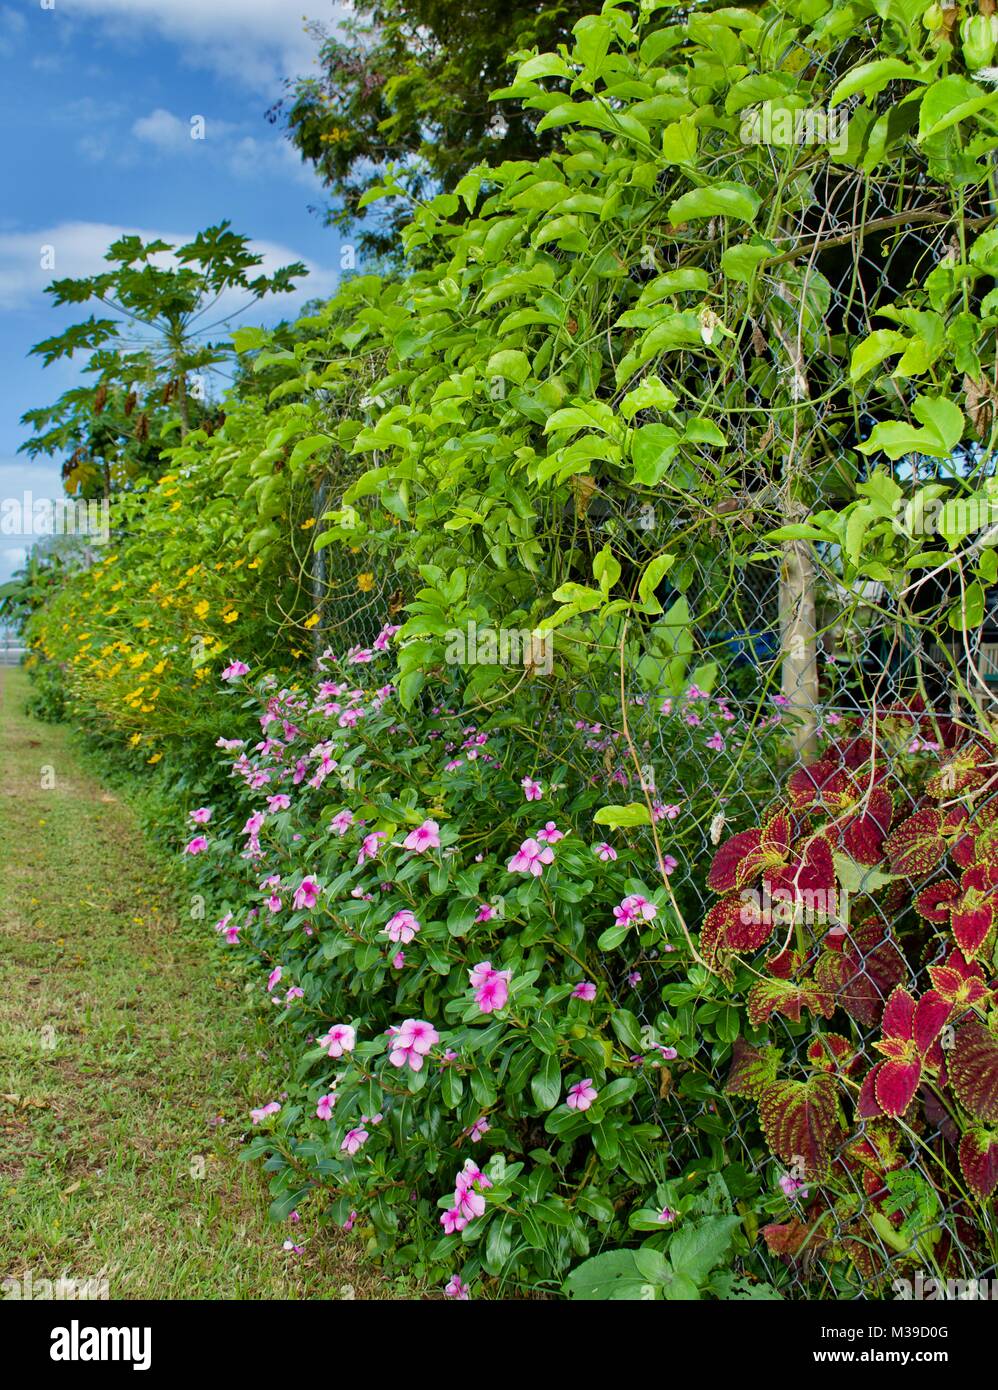 lush sidewalk garden along the fence of a communal community garden with passionfruit vines, small pink flower bushes and iresene Stock Photo